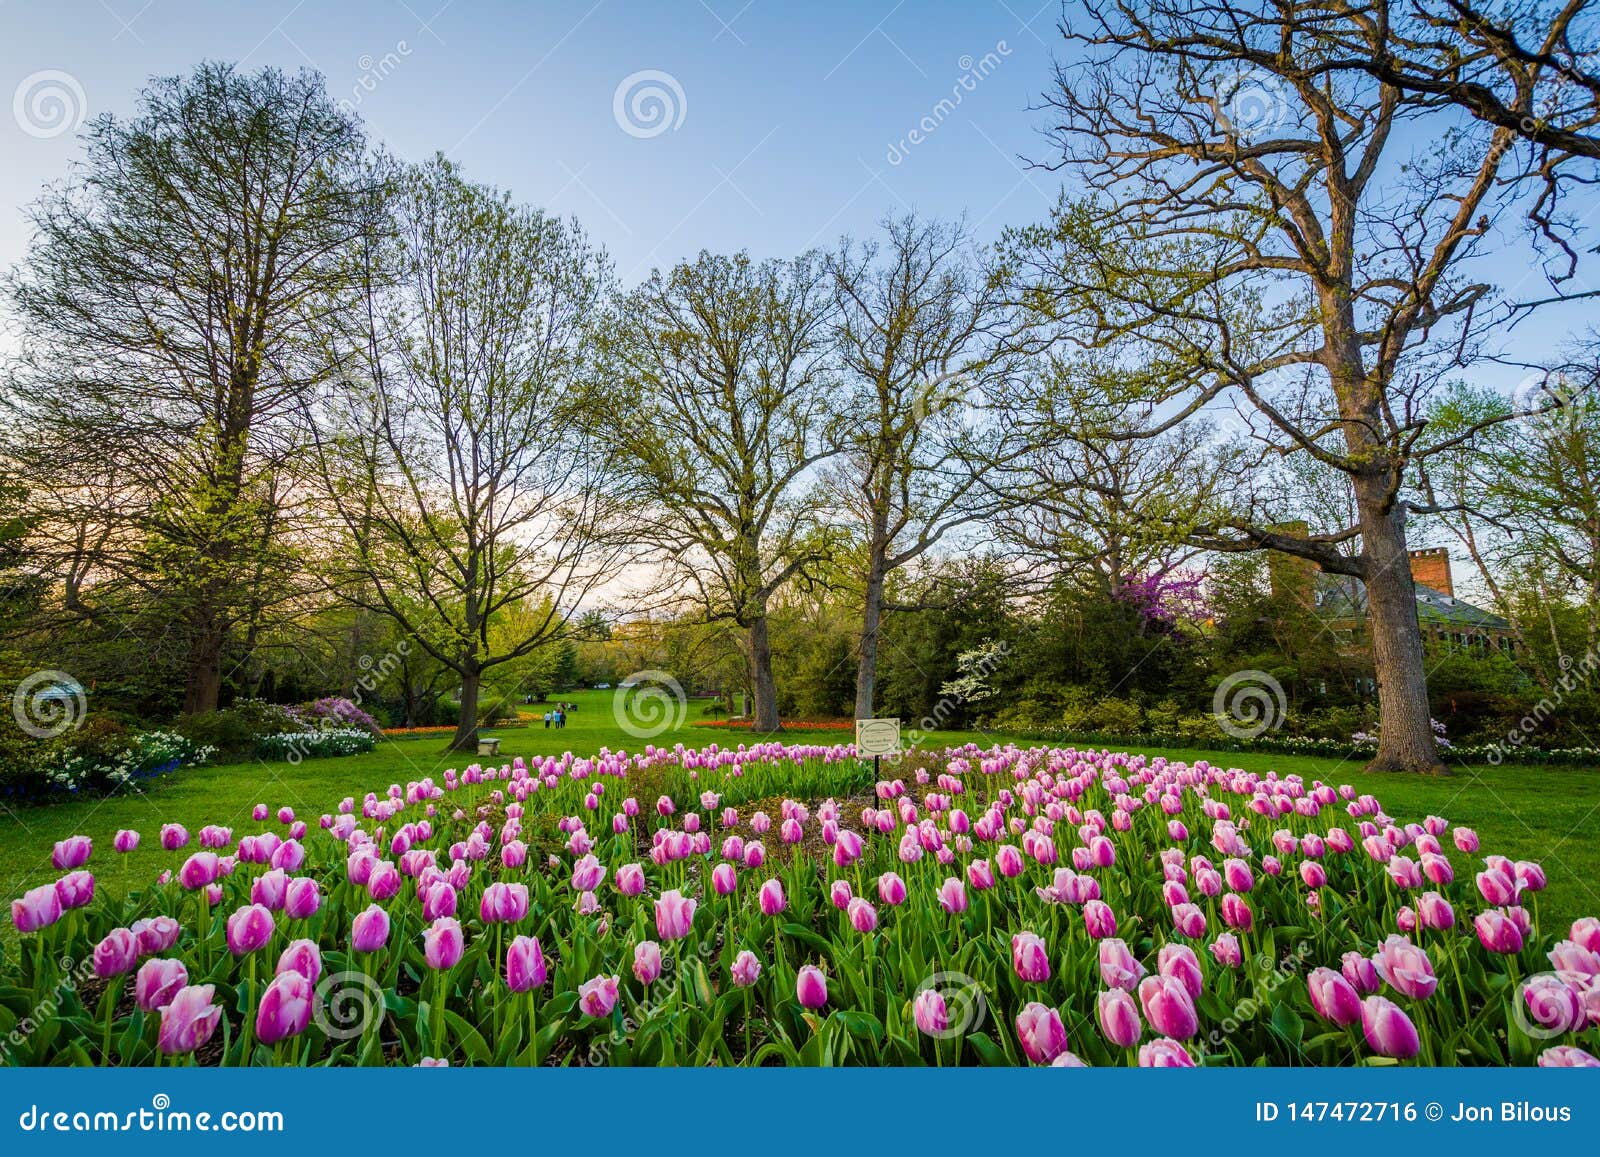 Tulips At Sherwood Gardens Park In Guilford Baltimore Maryland